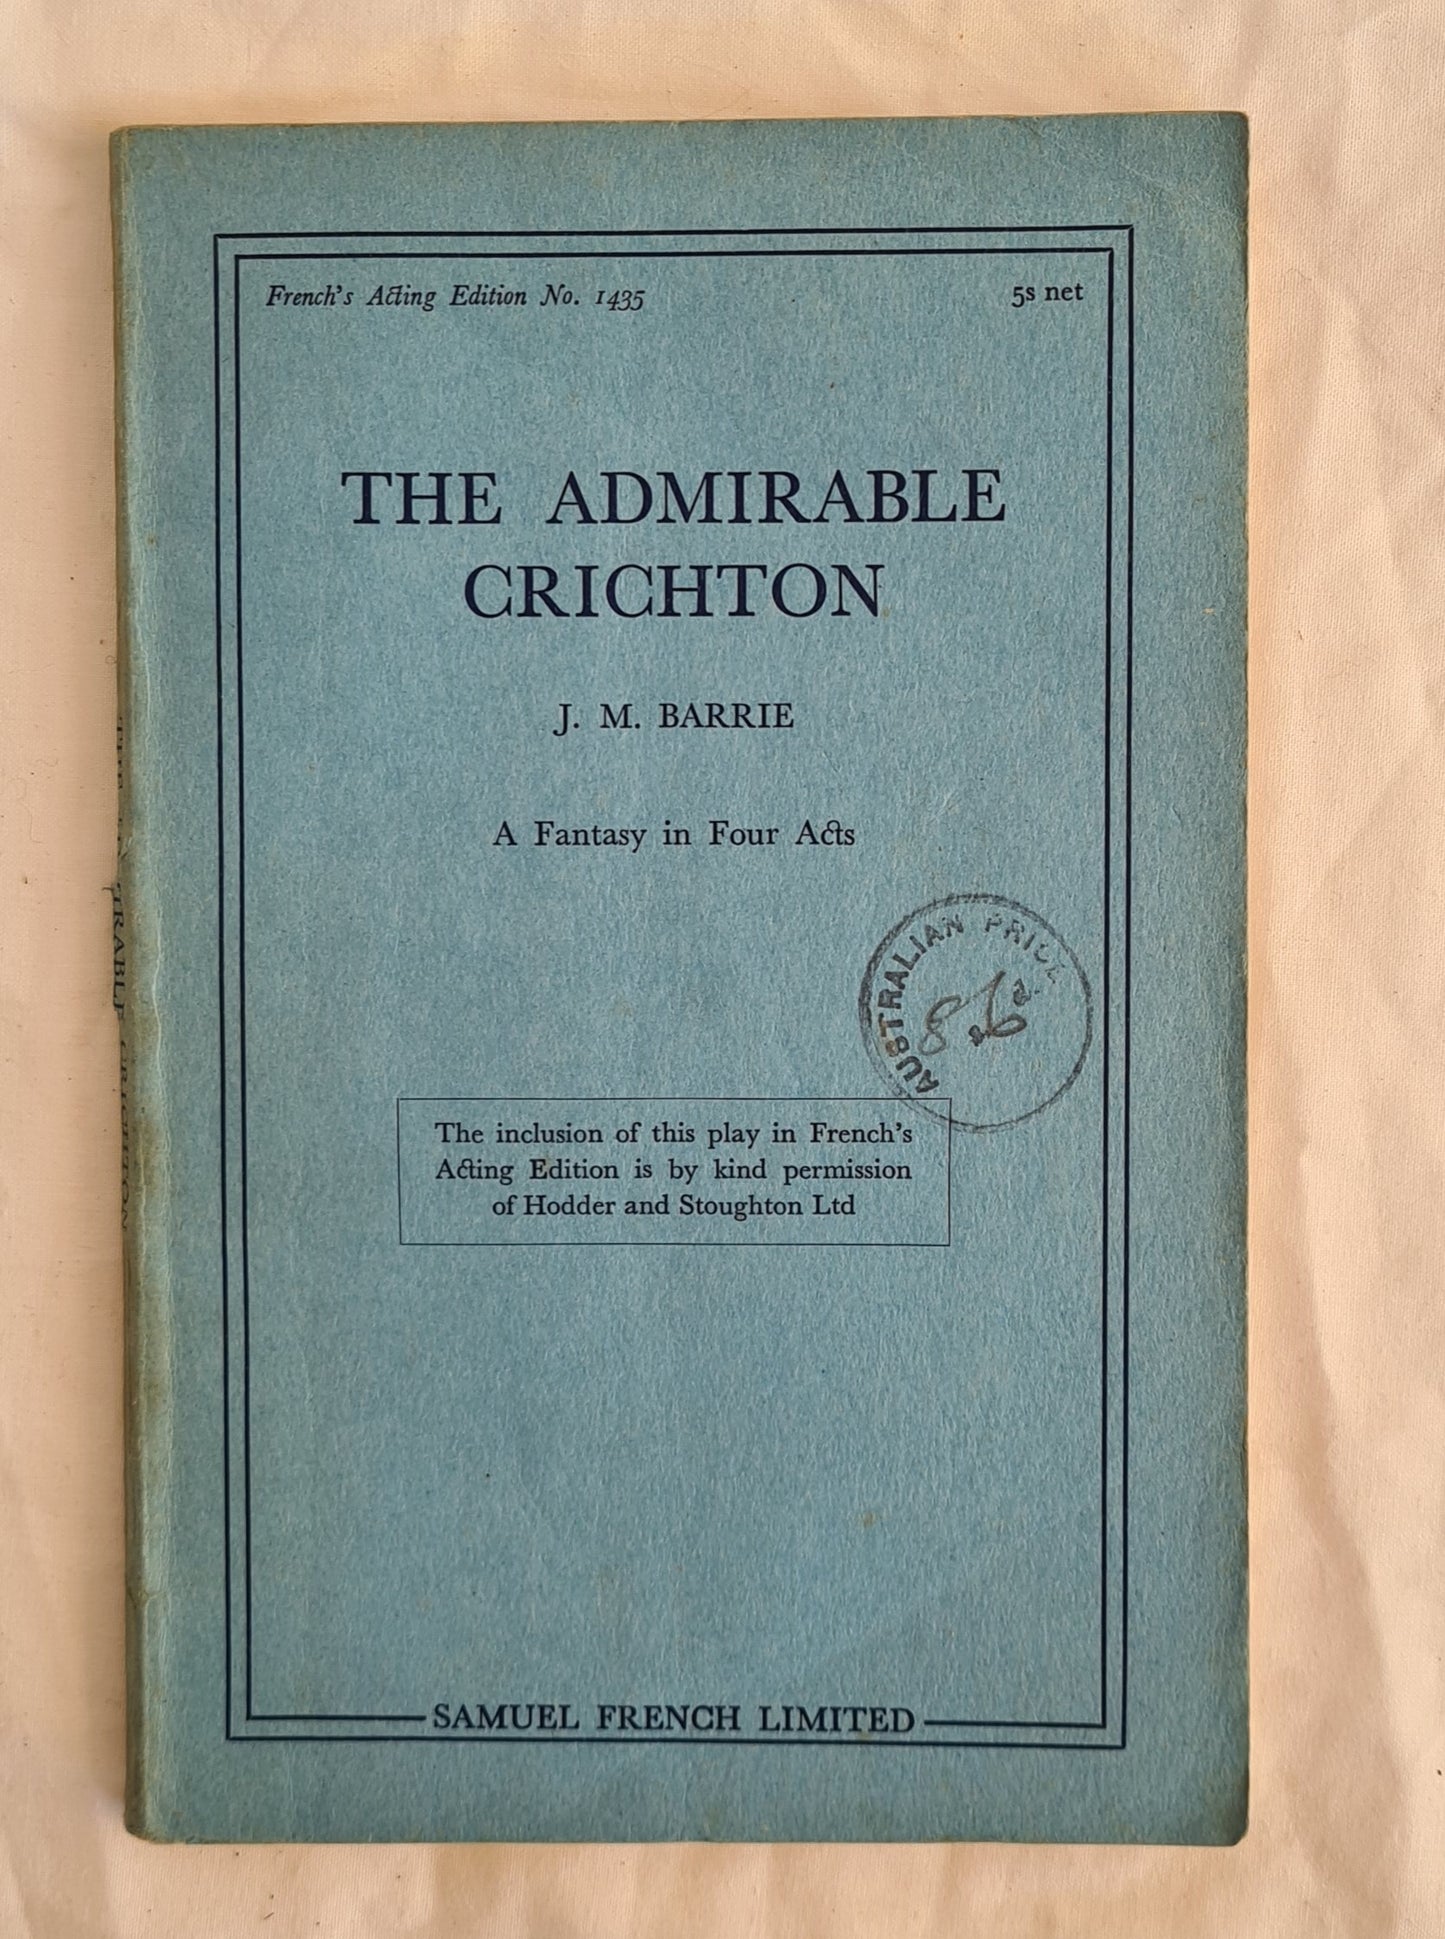 The Admirable Crichton  A Fantasy in Four Acts  by J. M. Barrie